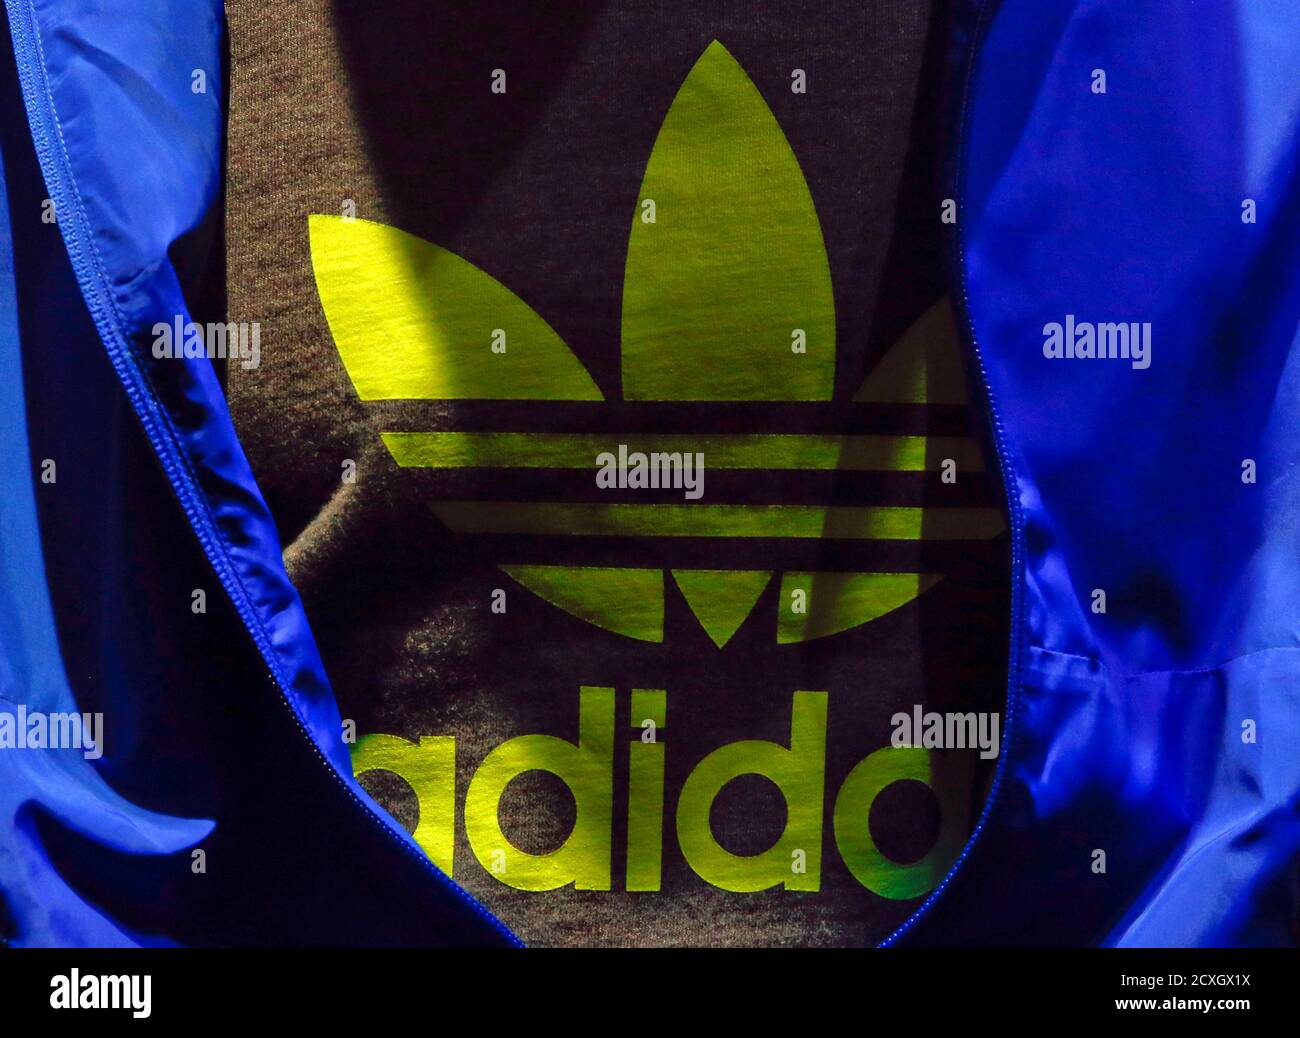 The Adidas logo is pictured on a shirt during the company's annual news  conference in Herzogenaurach March 7, 2013. Adidas, the world's second  largest sports apparel firm, reported an unexpected loss in